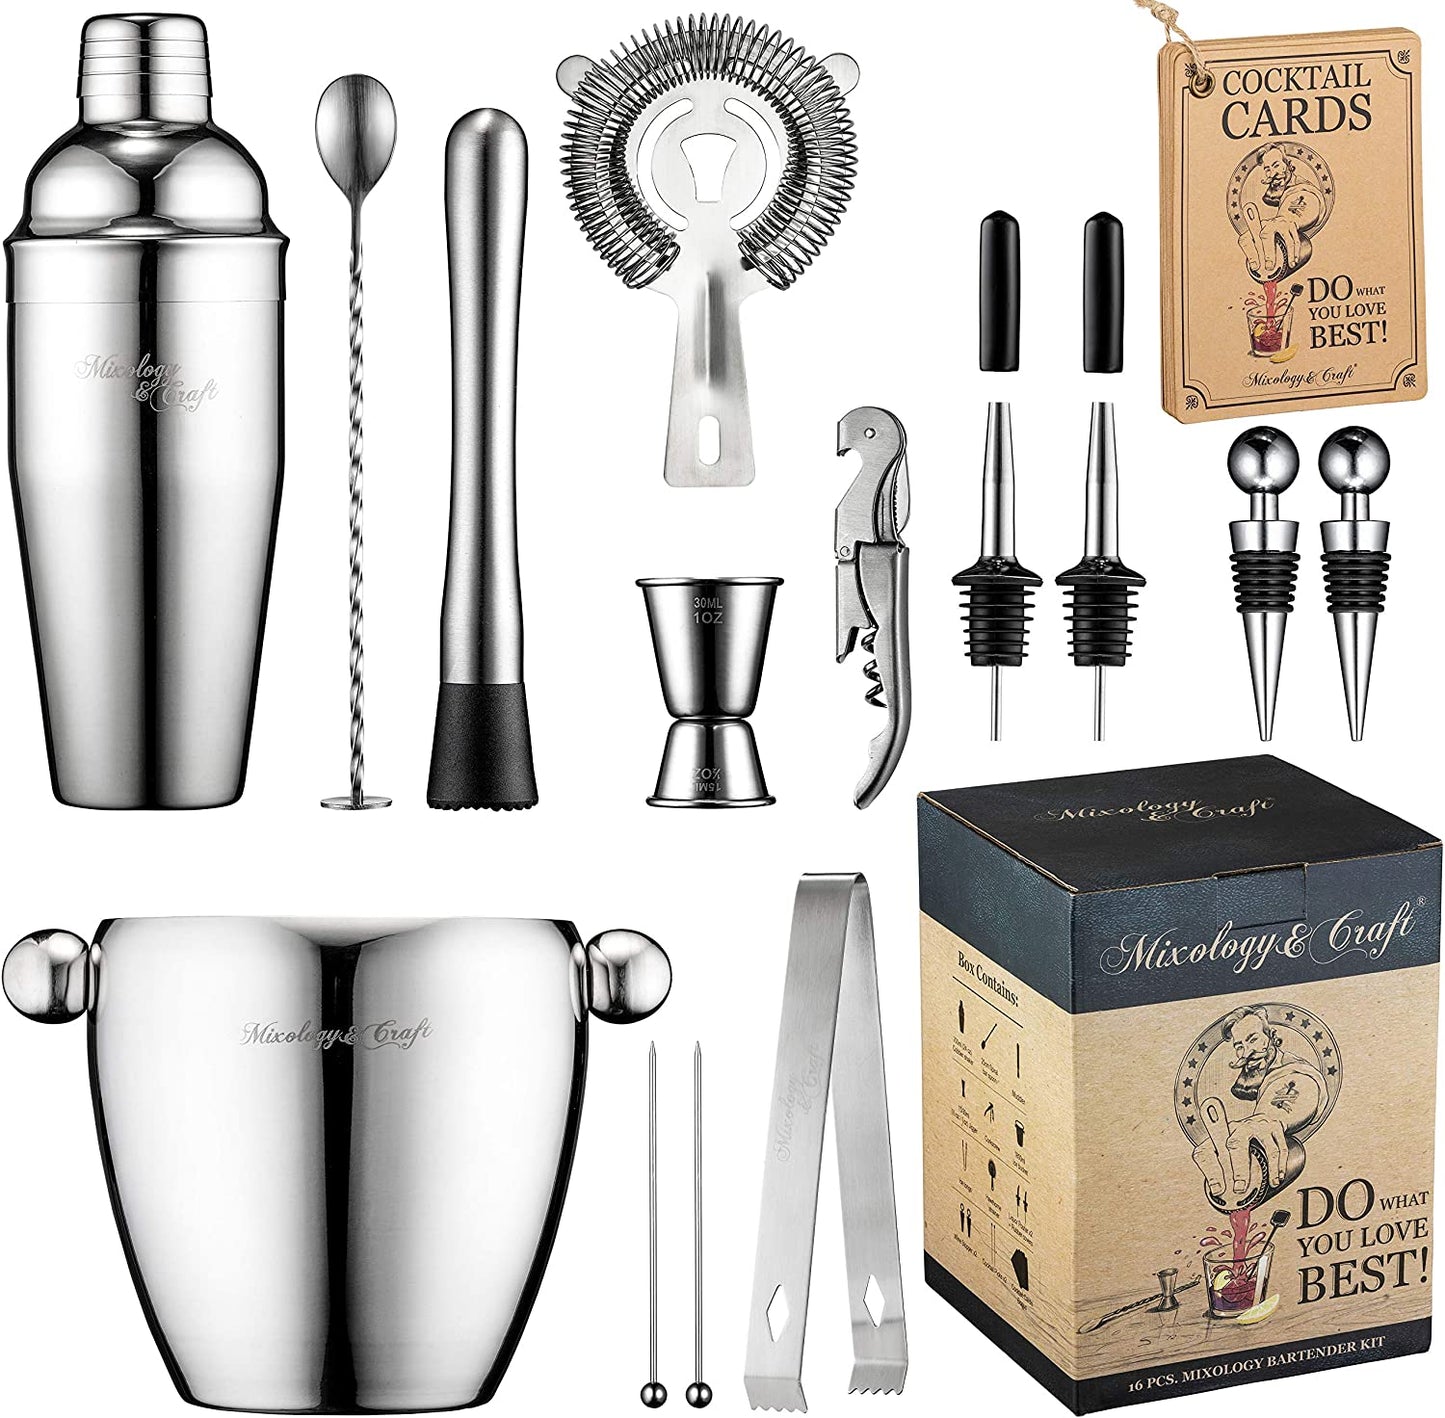 Bar Set 15 Piece Mixology Bartender Kit - Cocktail Shaker Set Bar Tool Set for Home and Professional Bartending - Martini Shaker and Drink Mixing Bar Tools - Cocktail Kit w/Exclusive Recipes Bonus - (For 6 piece(s))